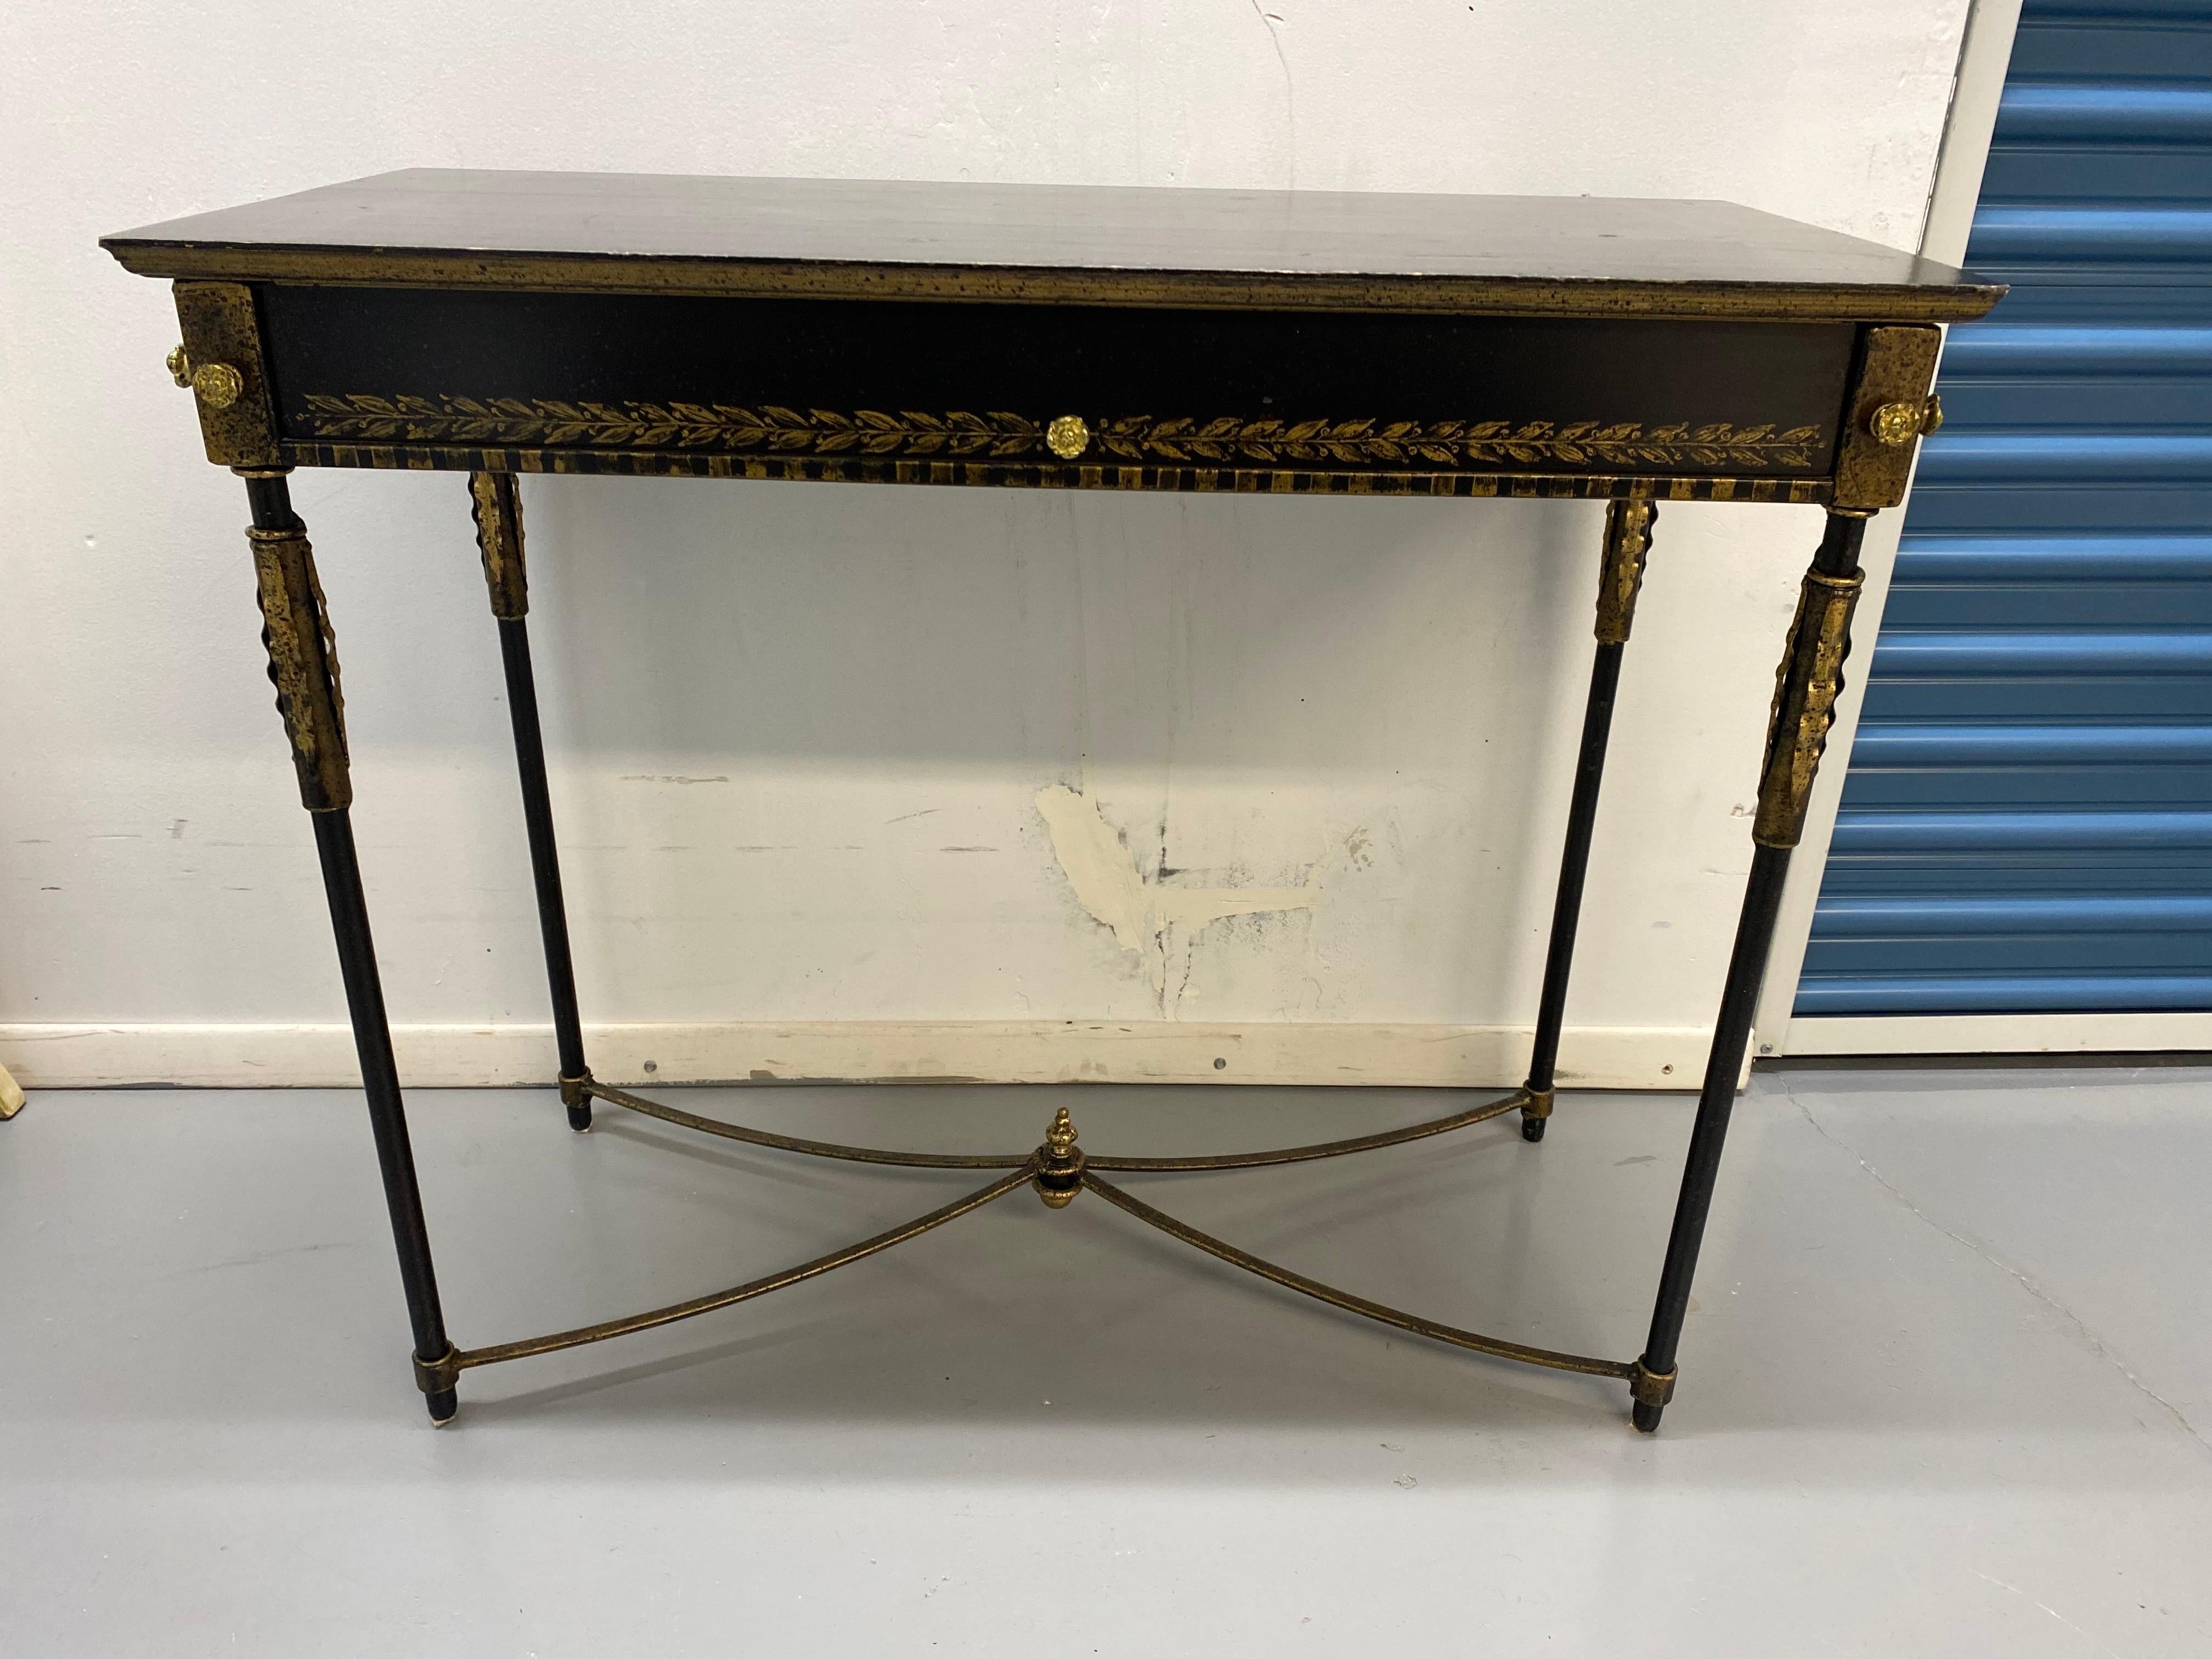 Contemporary Neoclassical Style Table with Painted Decoration by Art & Commerce For Sale